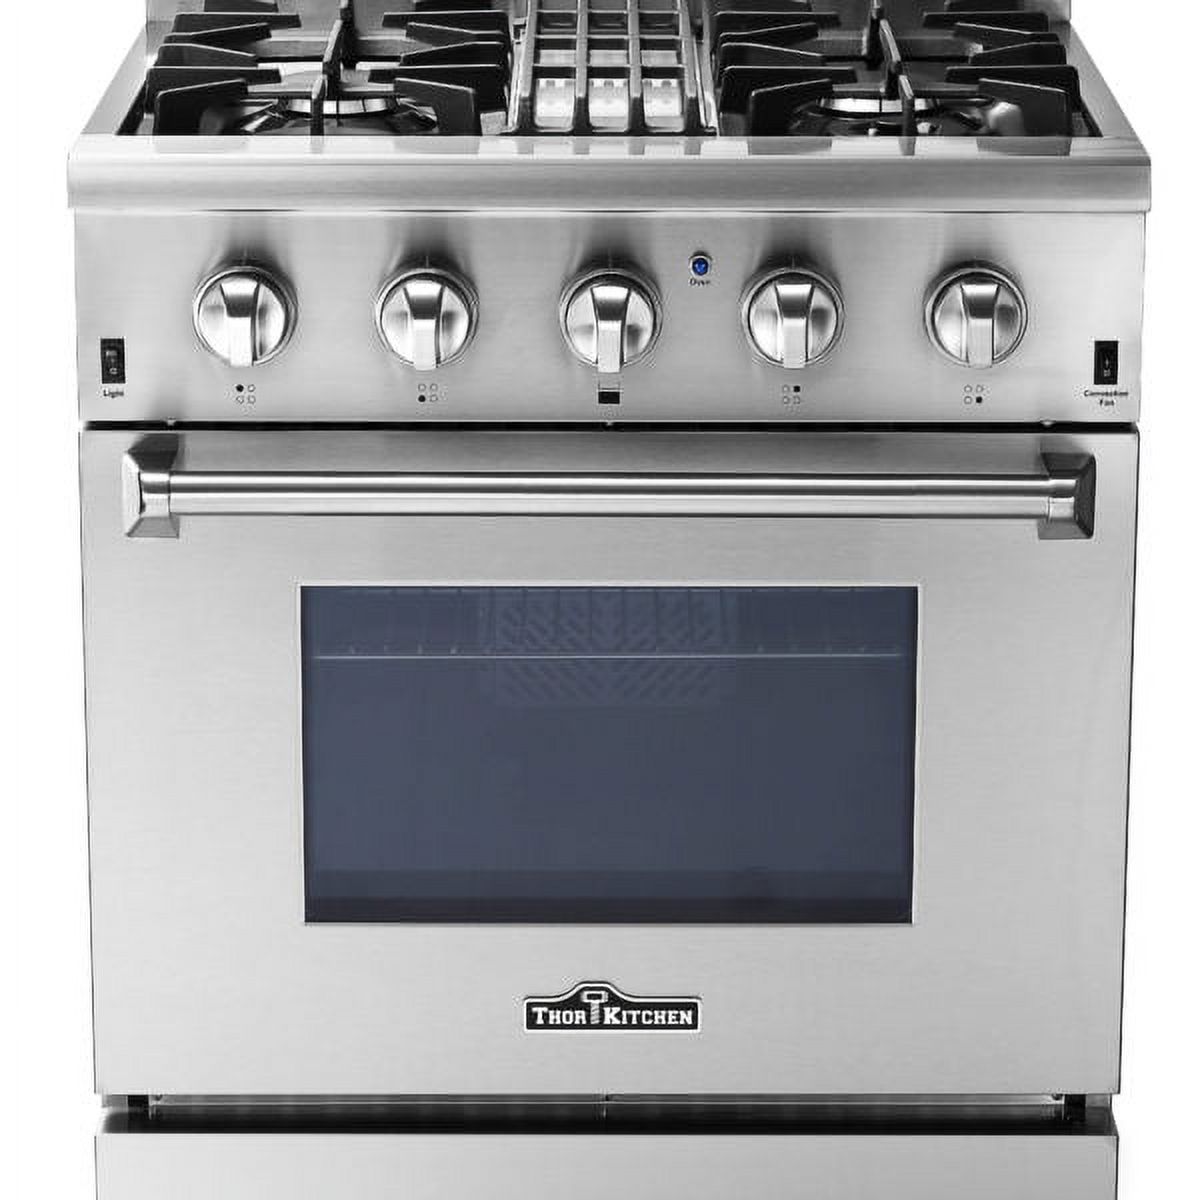 Thor Kitchen 30" Professional Free Standing Dual Fuel Range, Stainless Steel - image 1 of 6